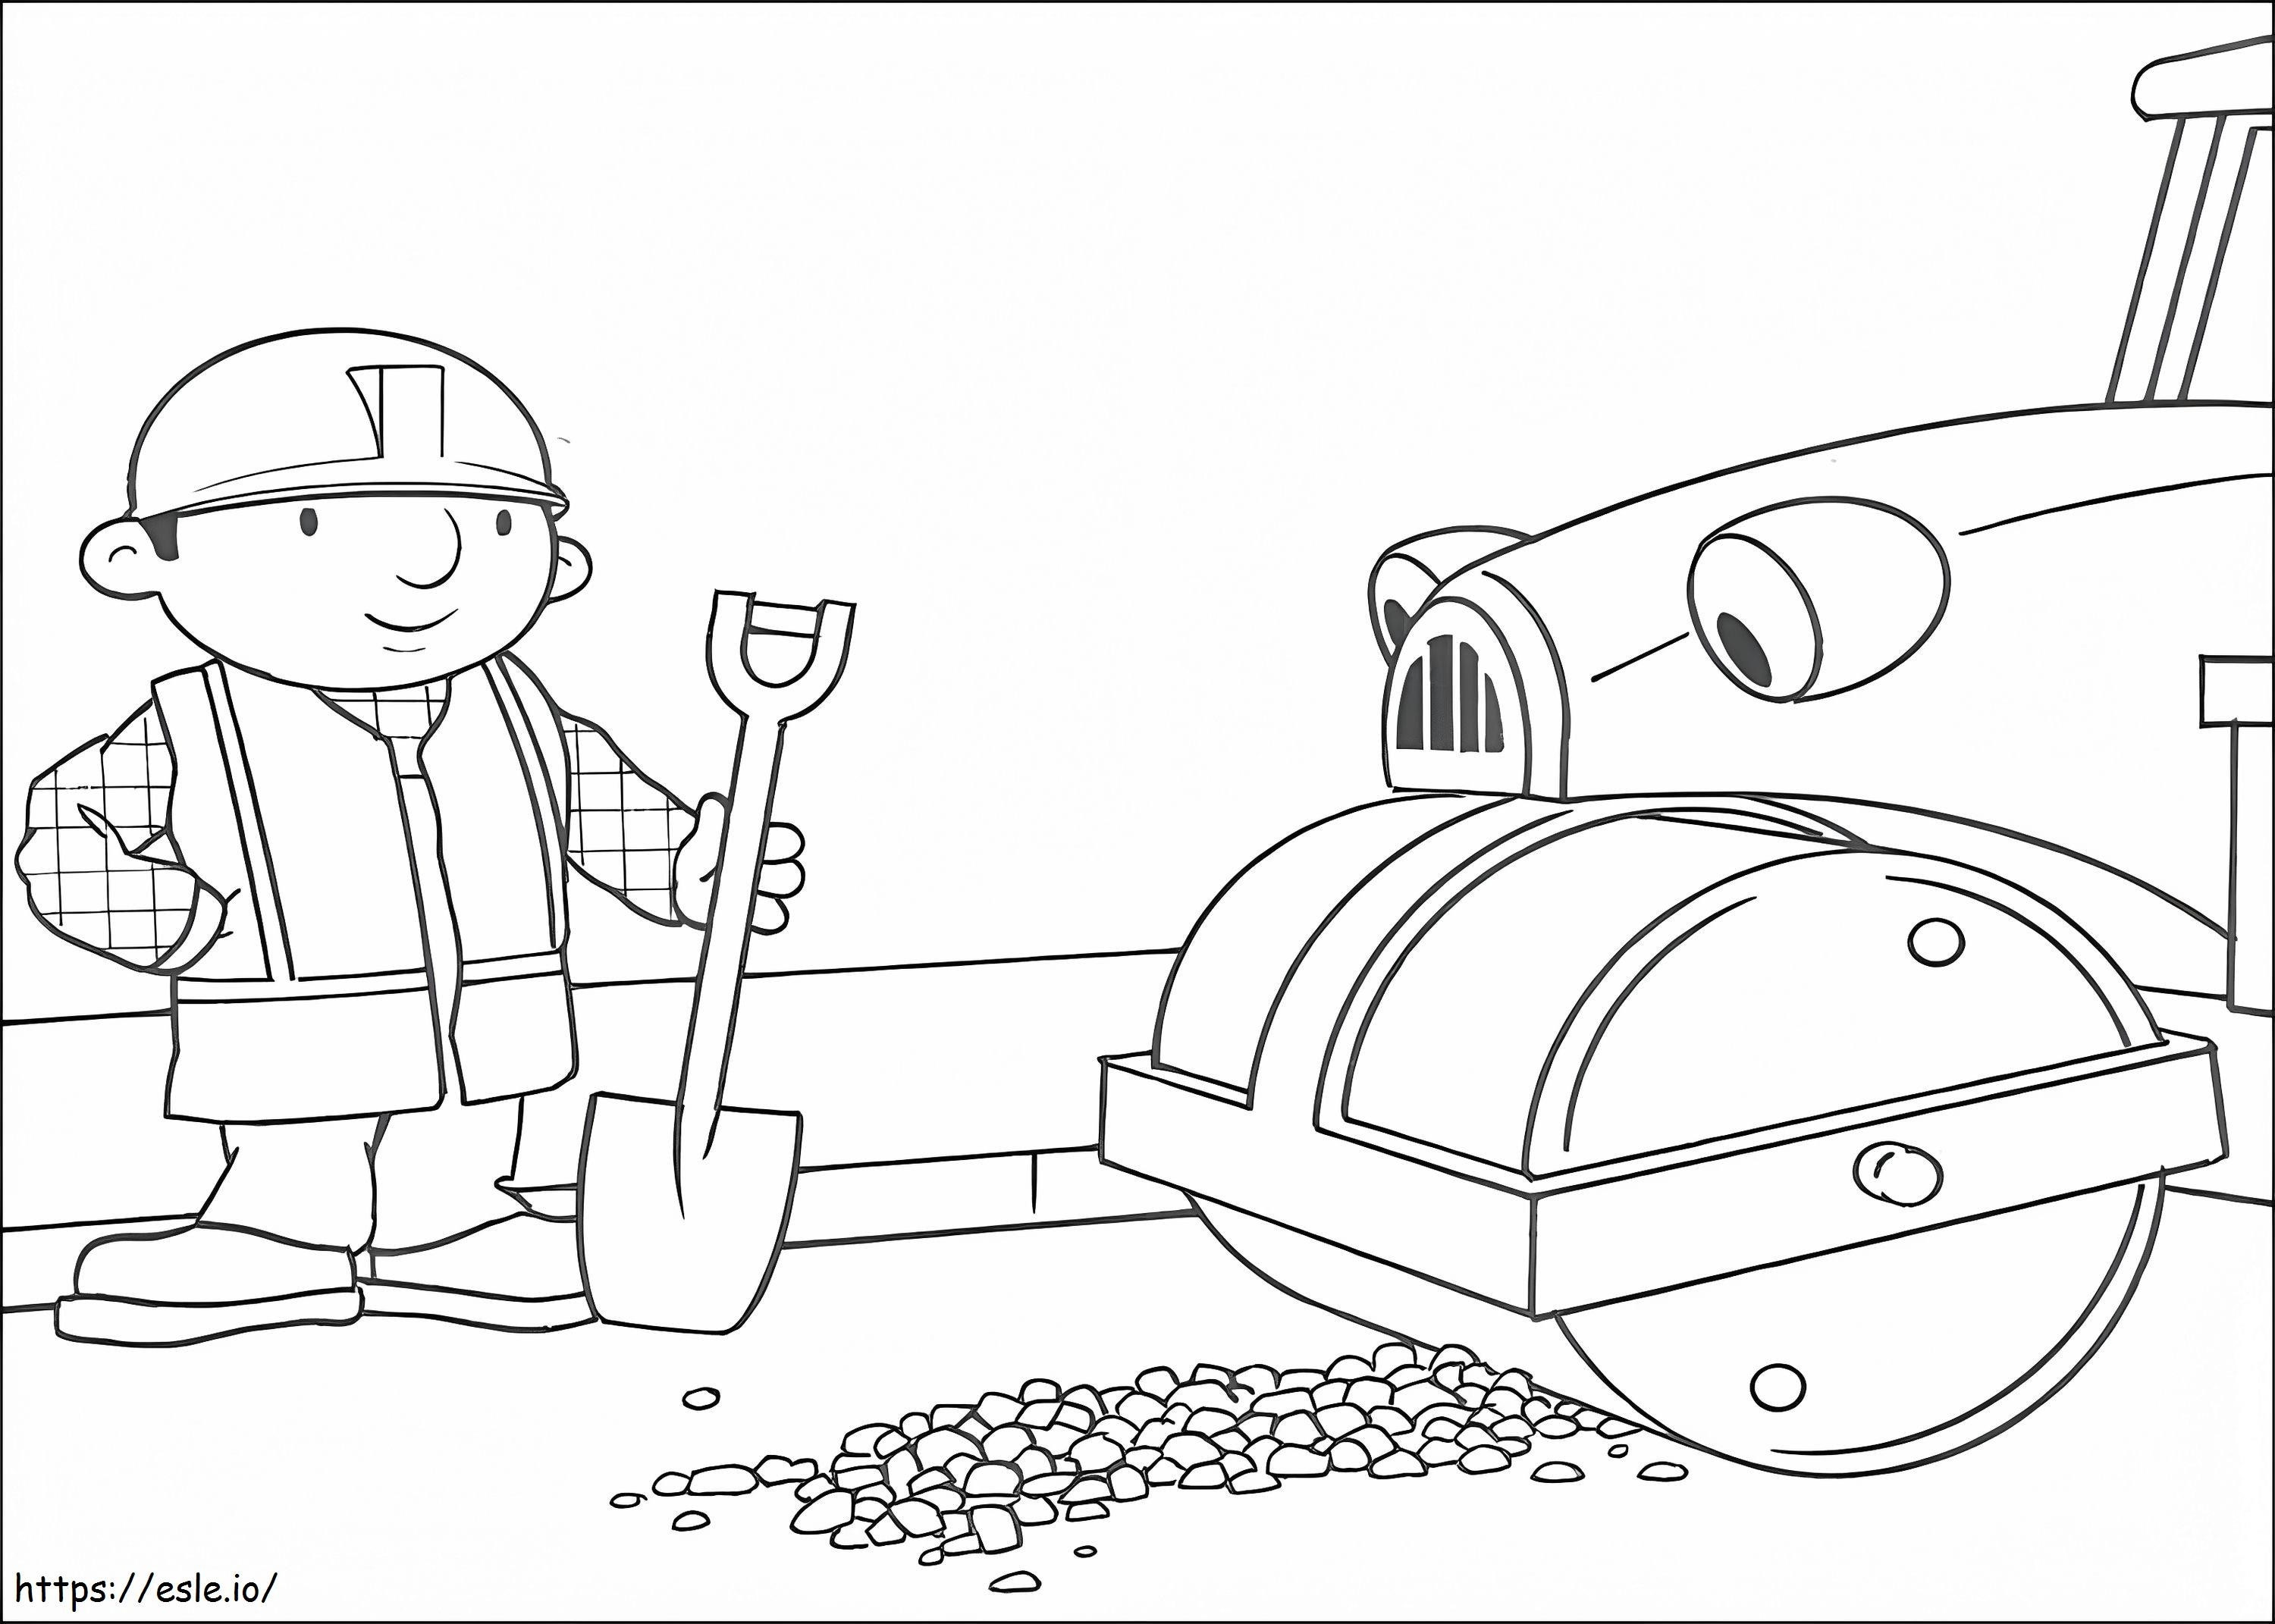 1534125780 Bob N Roley Working A4 E1600248216326 coloring page